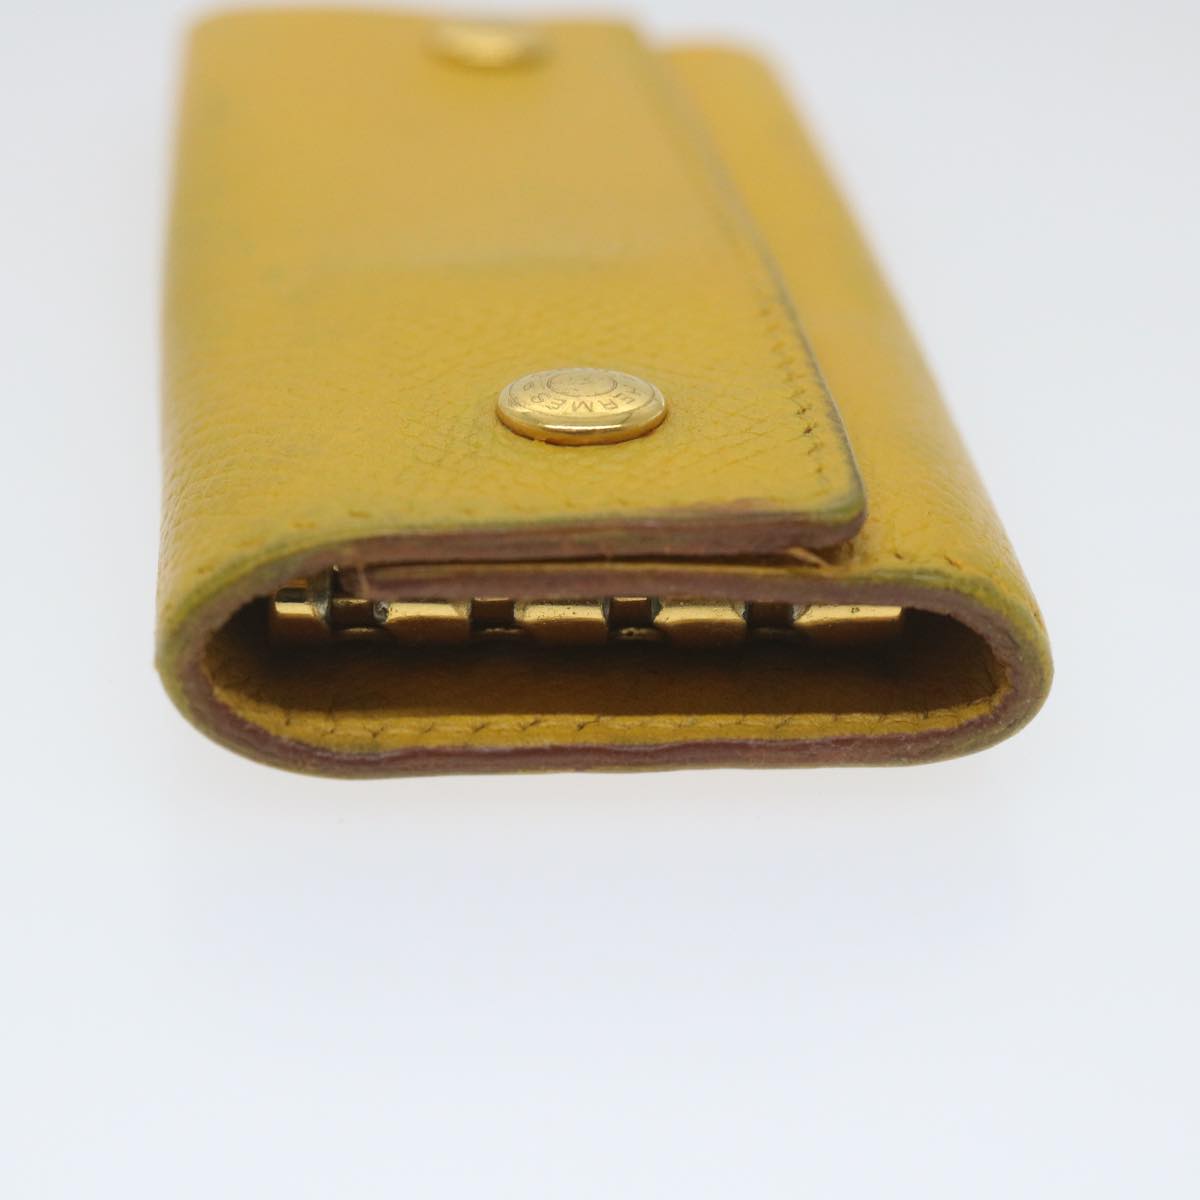 HERMES Key Case Leather Yellow Auth bs9645